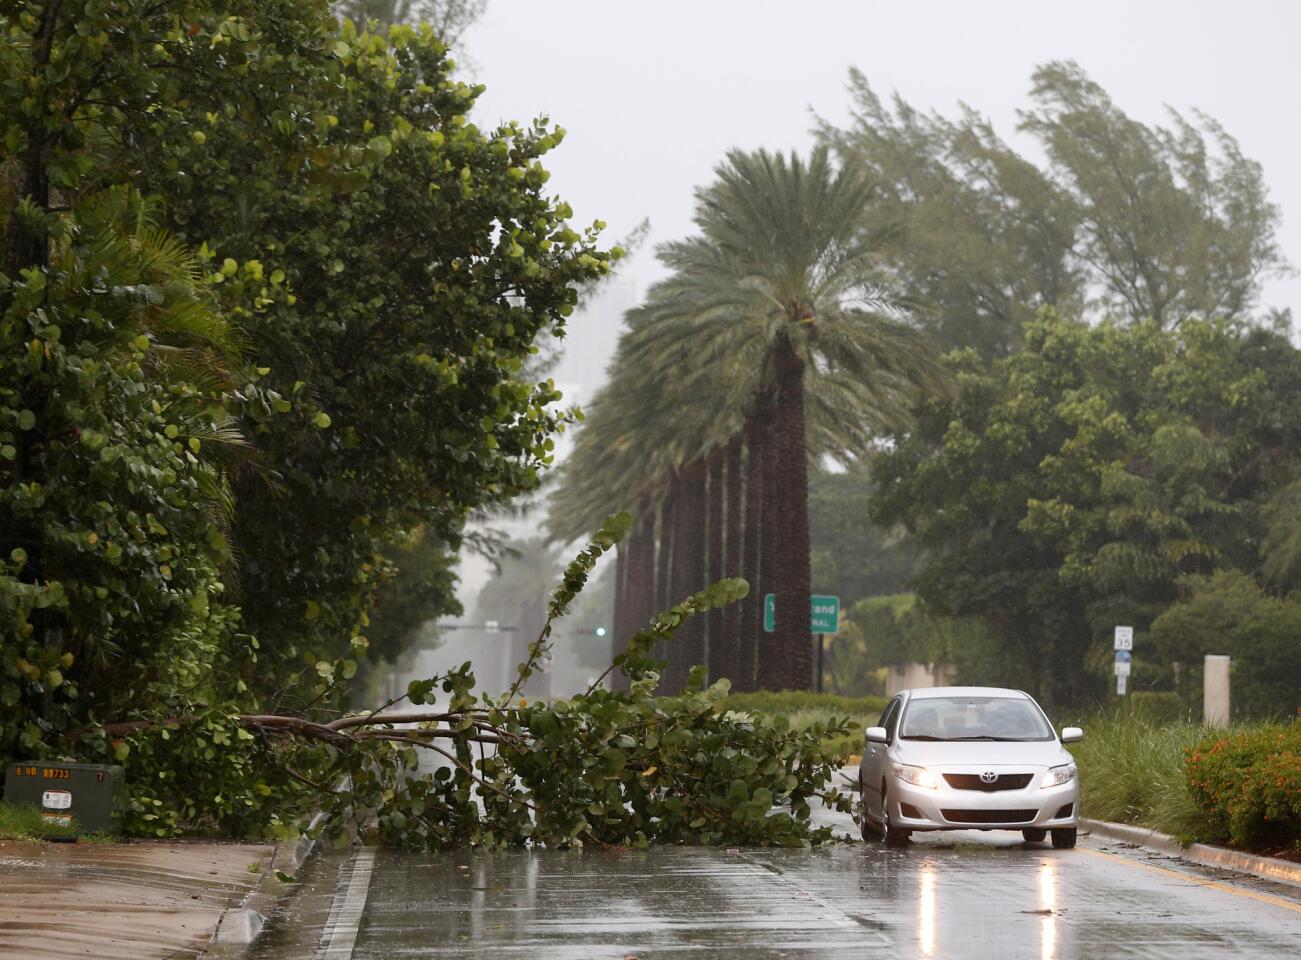 A car drives around a tree downed by winds from Hurricane Irma on Sept. 9, 2017, in Golden Beach, Fla.